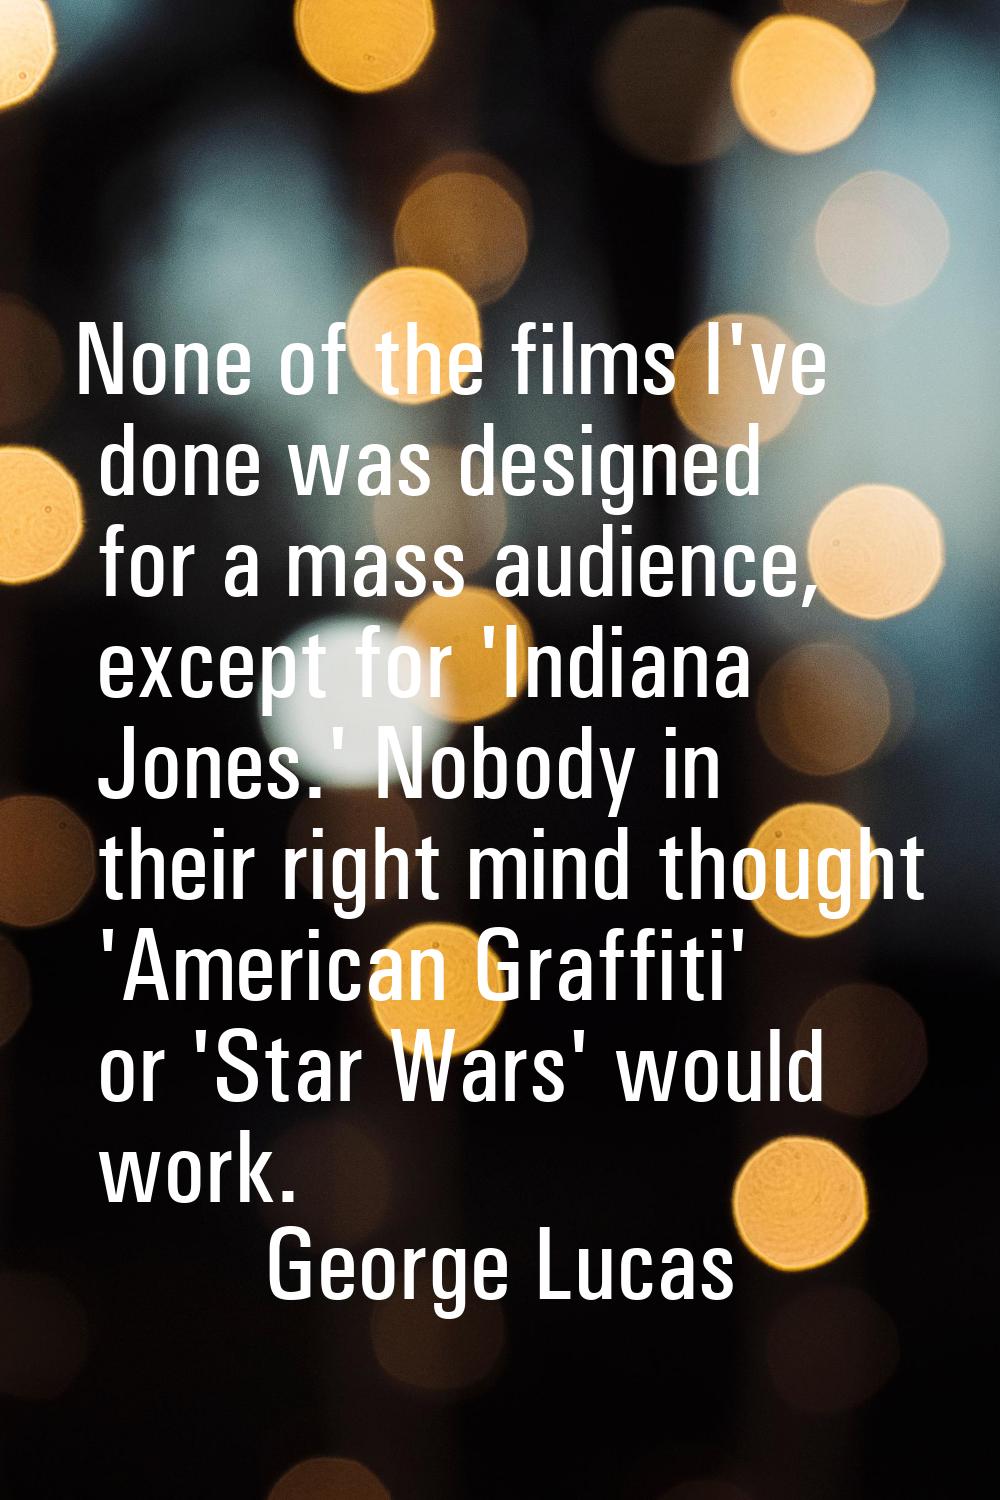 None of the films I've done was designed for a mass audience, except for 'Indiana Jones.' Nobody in